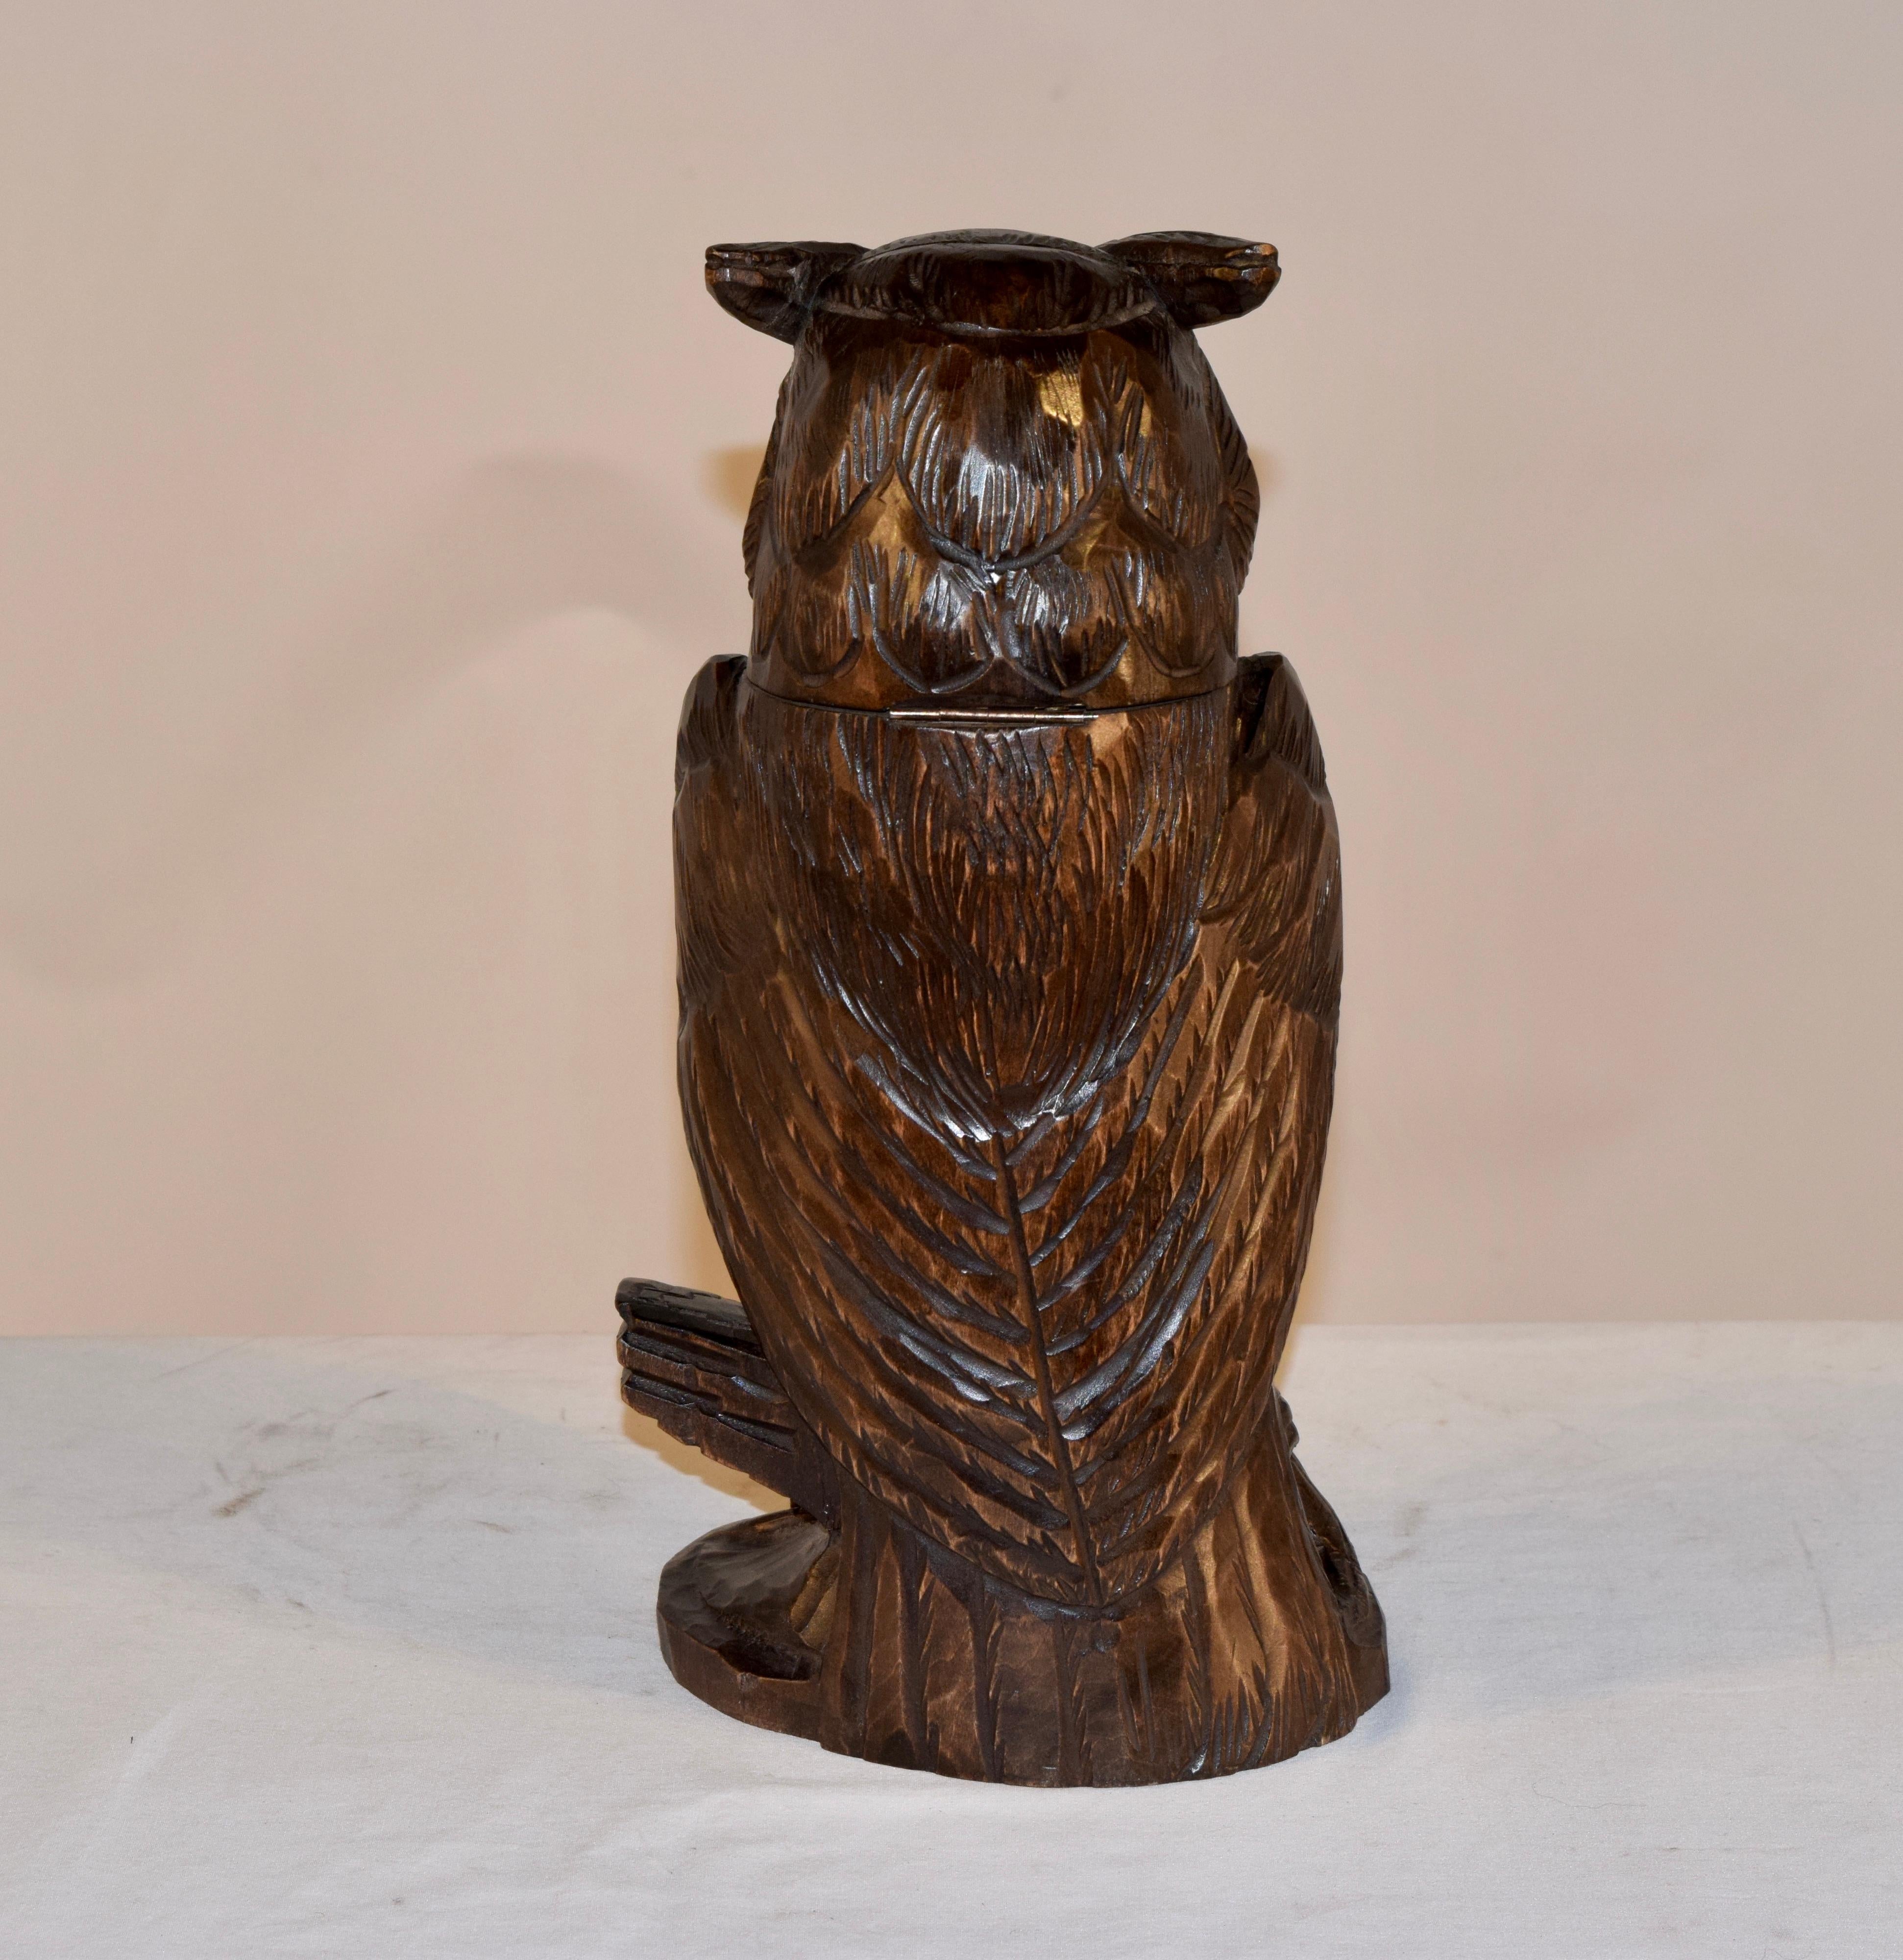 Hand-Carved Black Forest Carved Owl Humidor, circa 1900